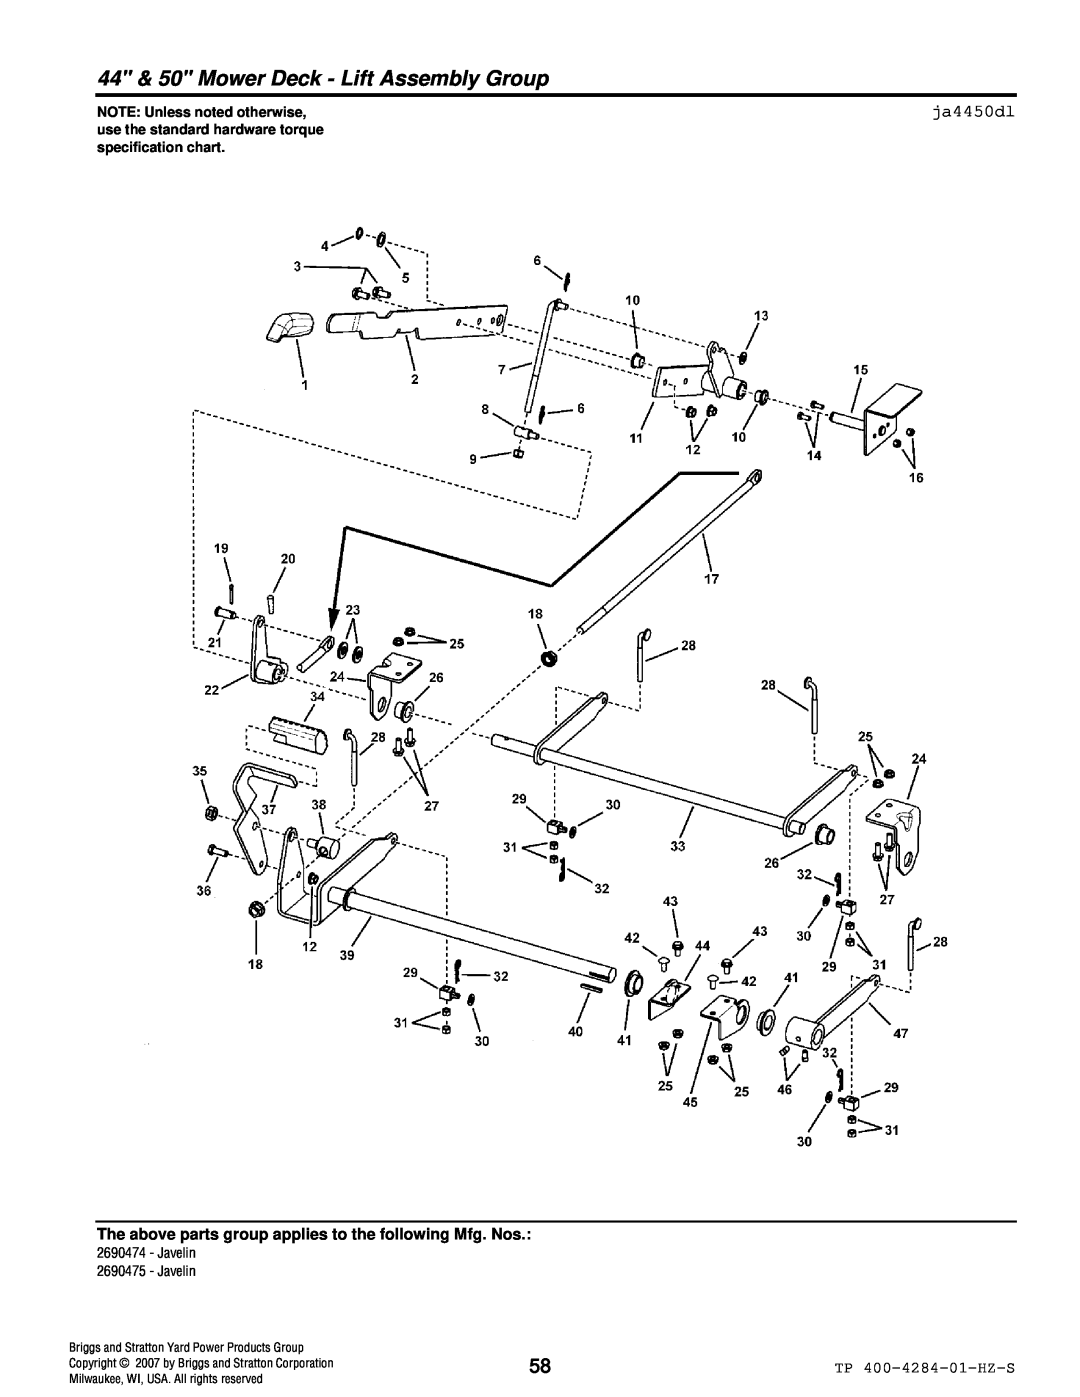 Simplicity TP 400-4284-01-HZ-S manual 44 & 50 Mower Deck - Lift Assembly Group, ja4450dl, NOTE: Unless noted otherwise 